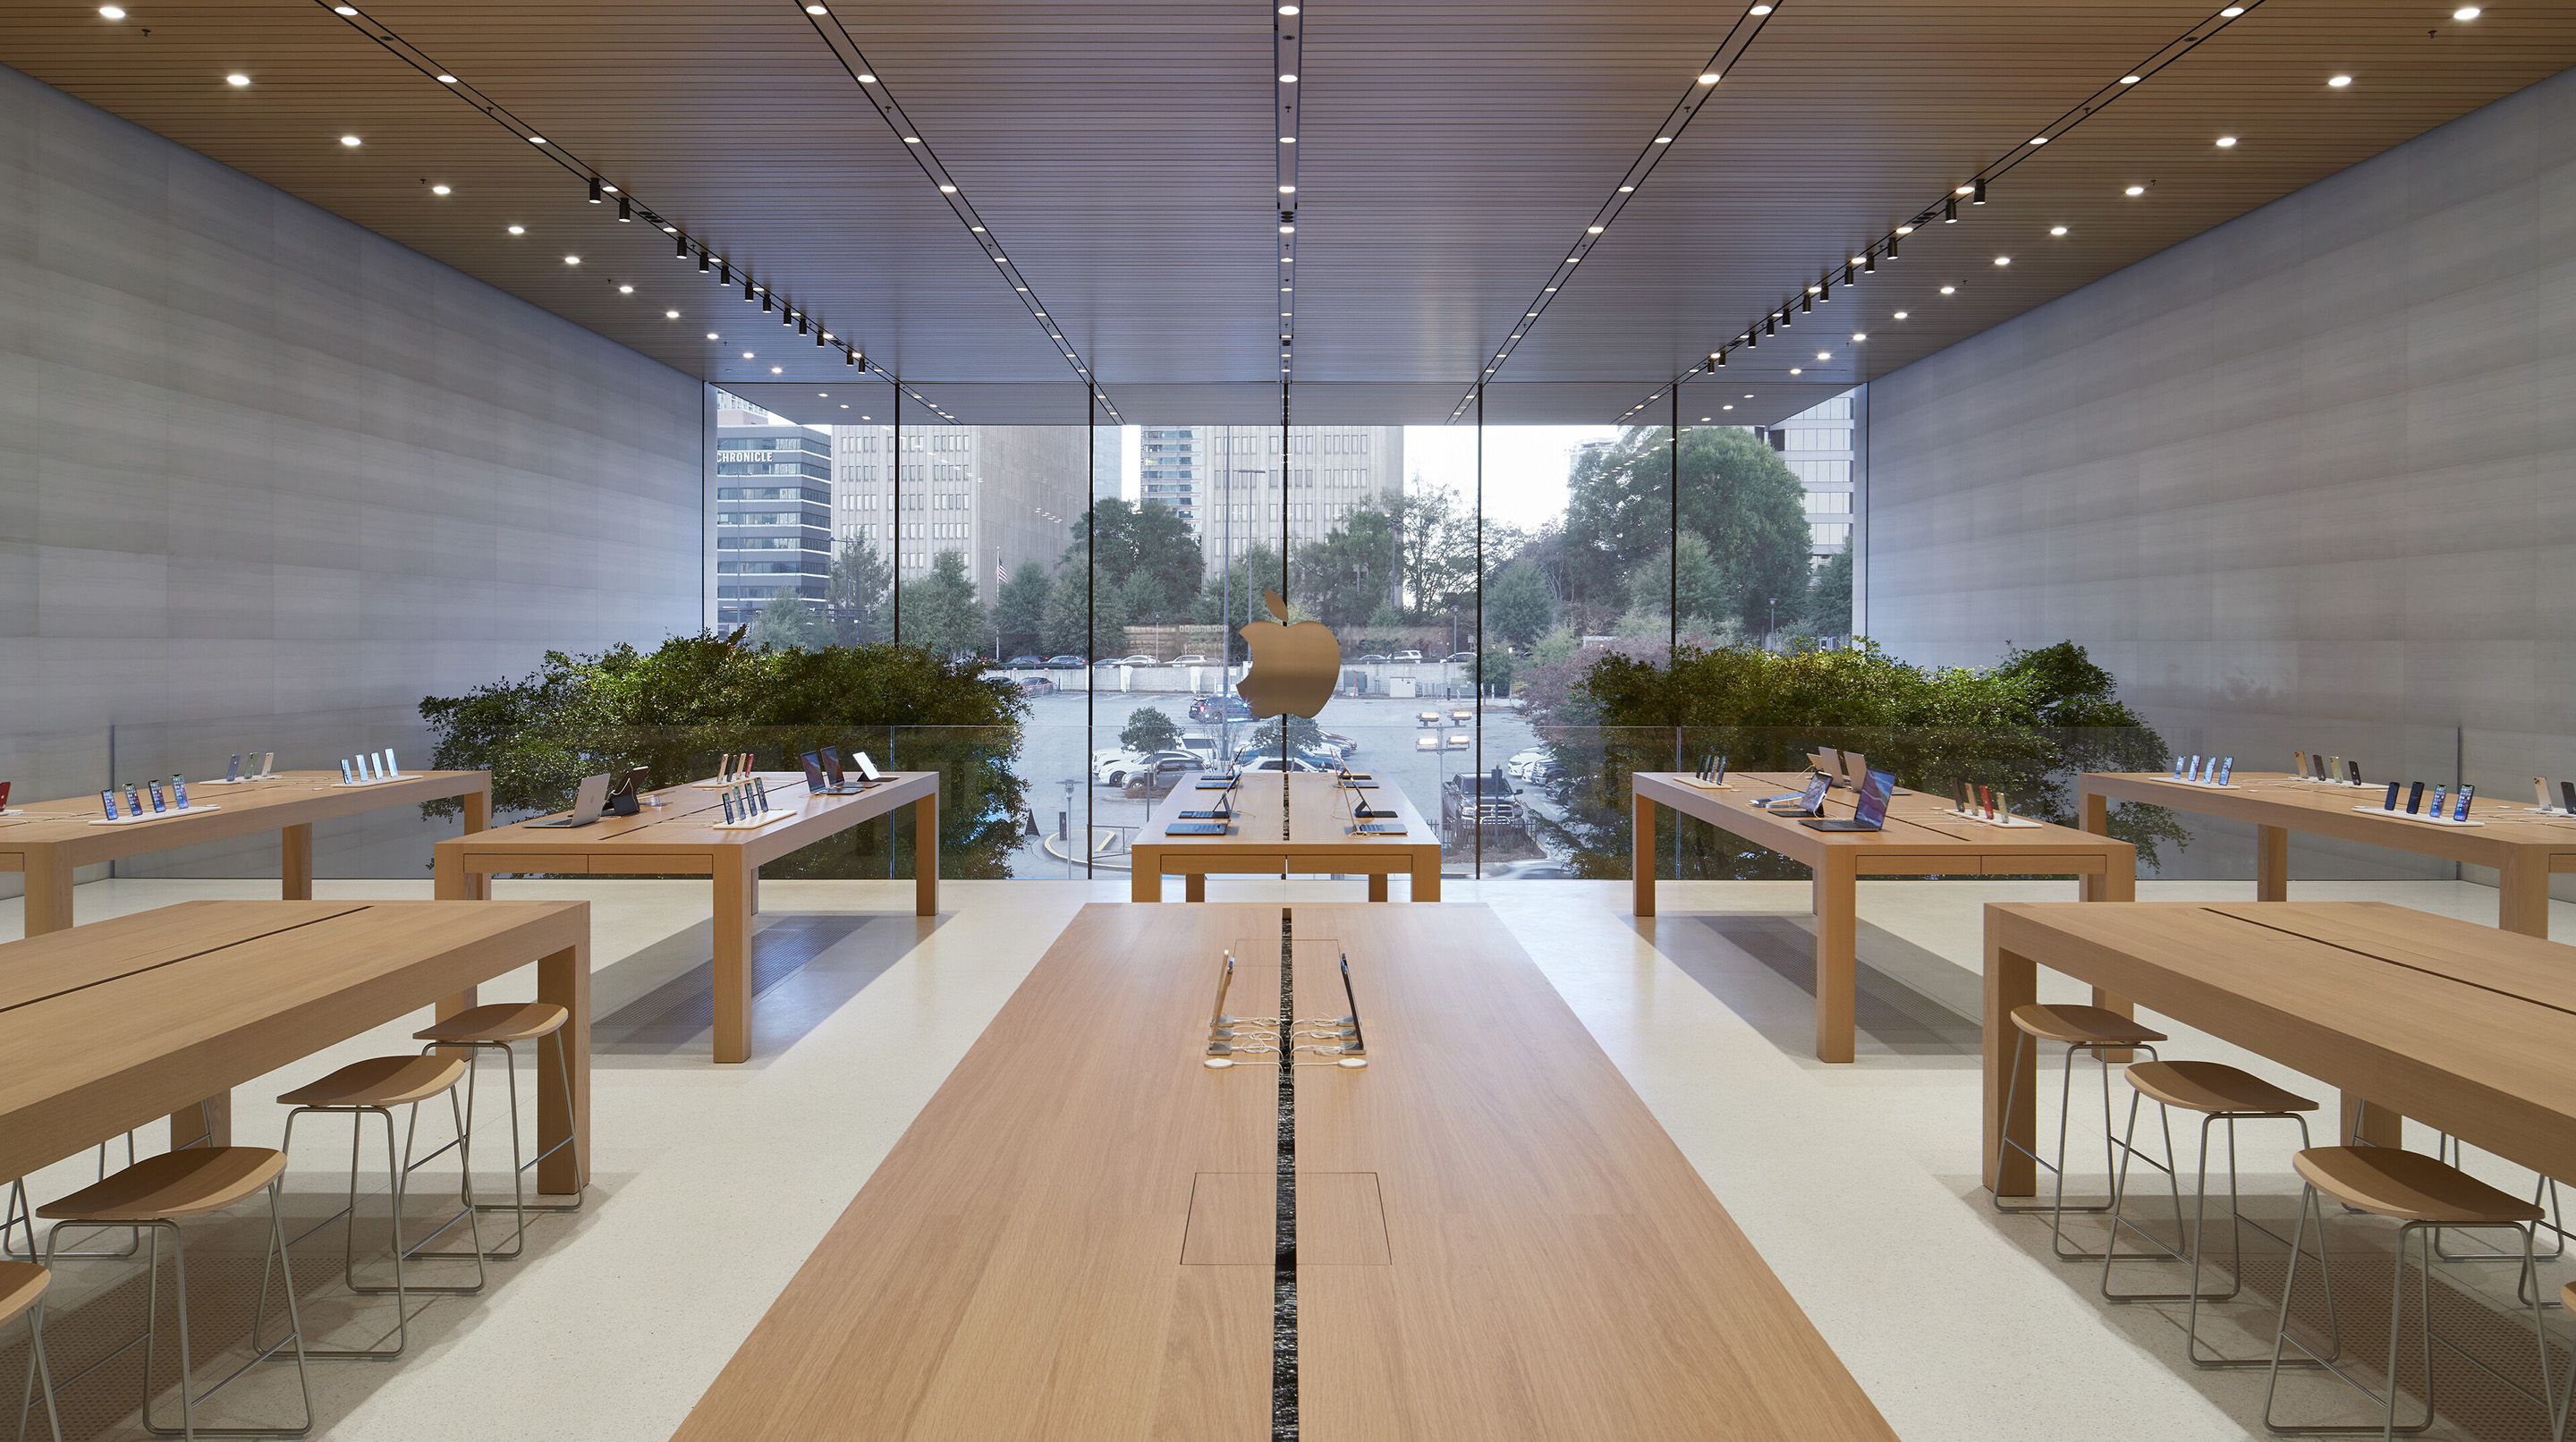 Mall: Apple Lenox Square nearby Atlanta in United States of America: 10  reviews, address, website 